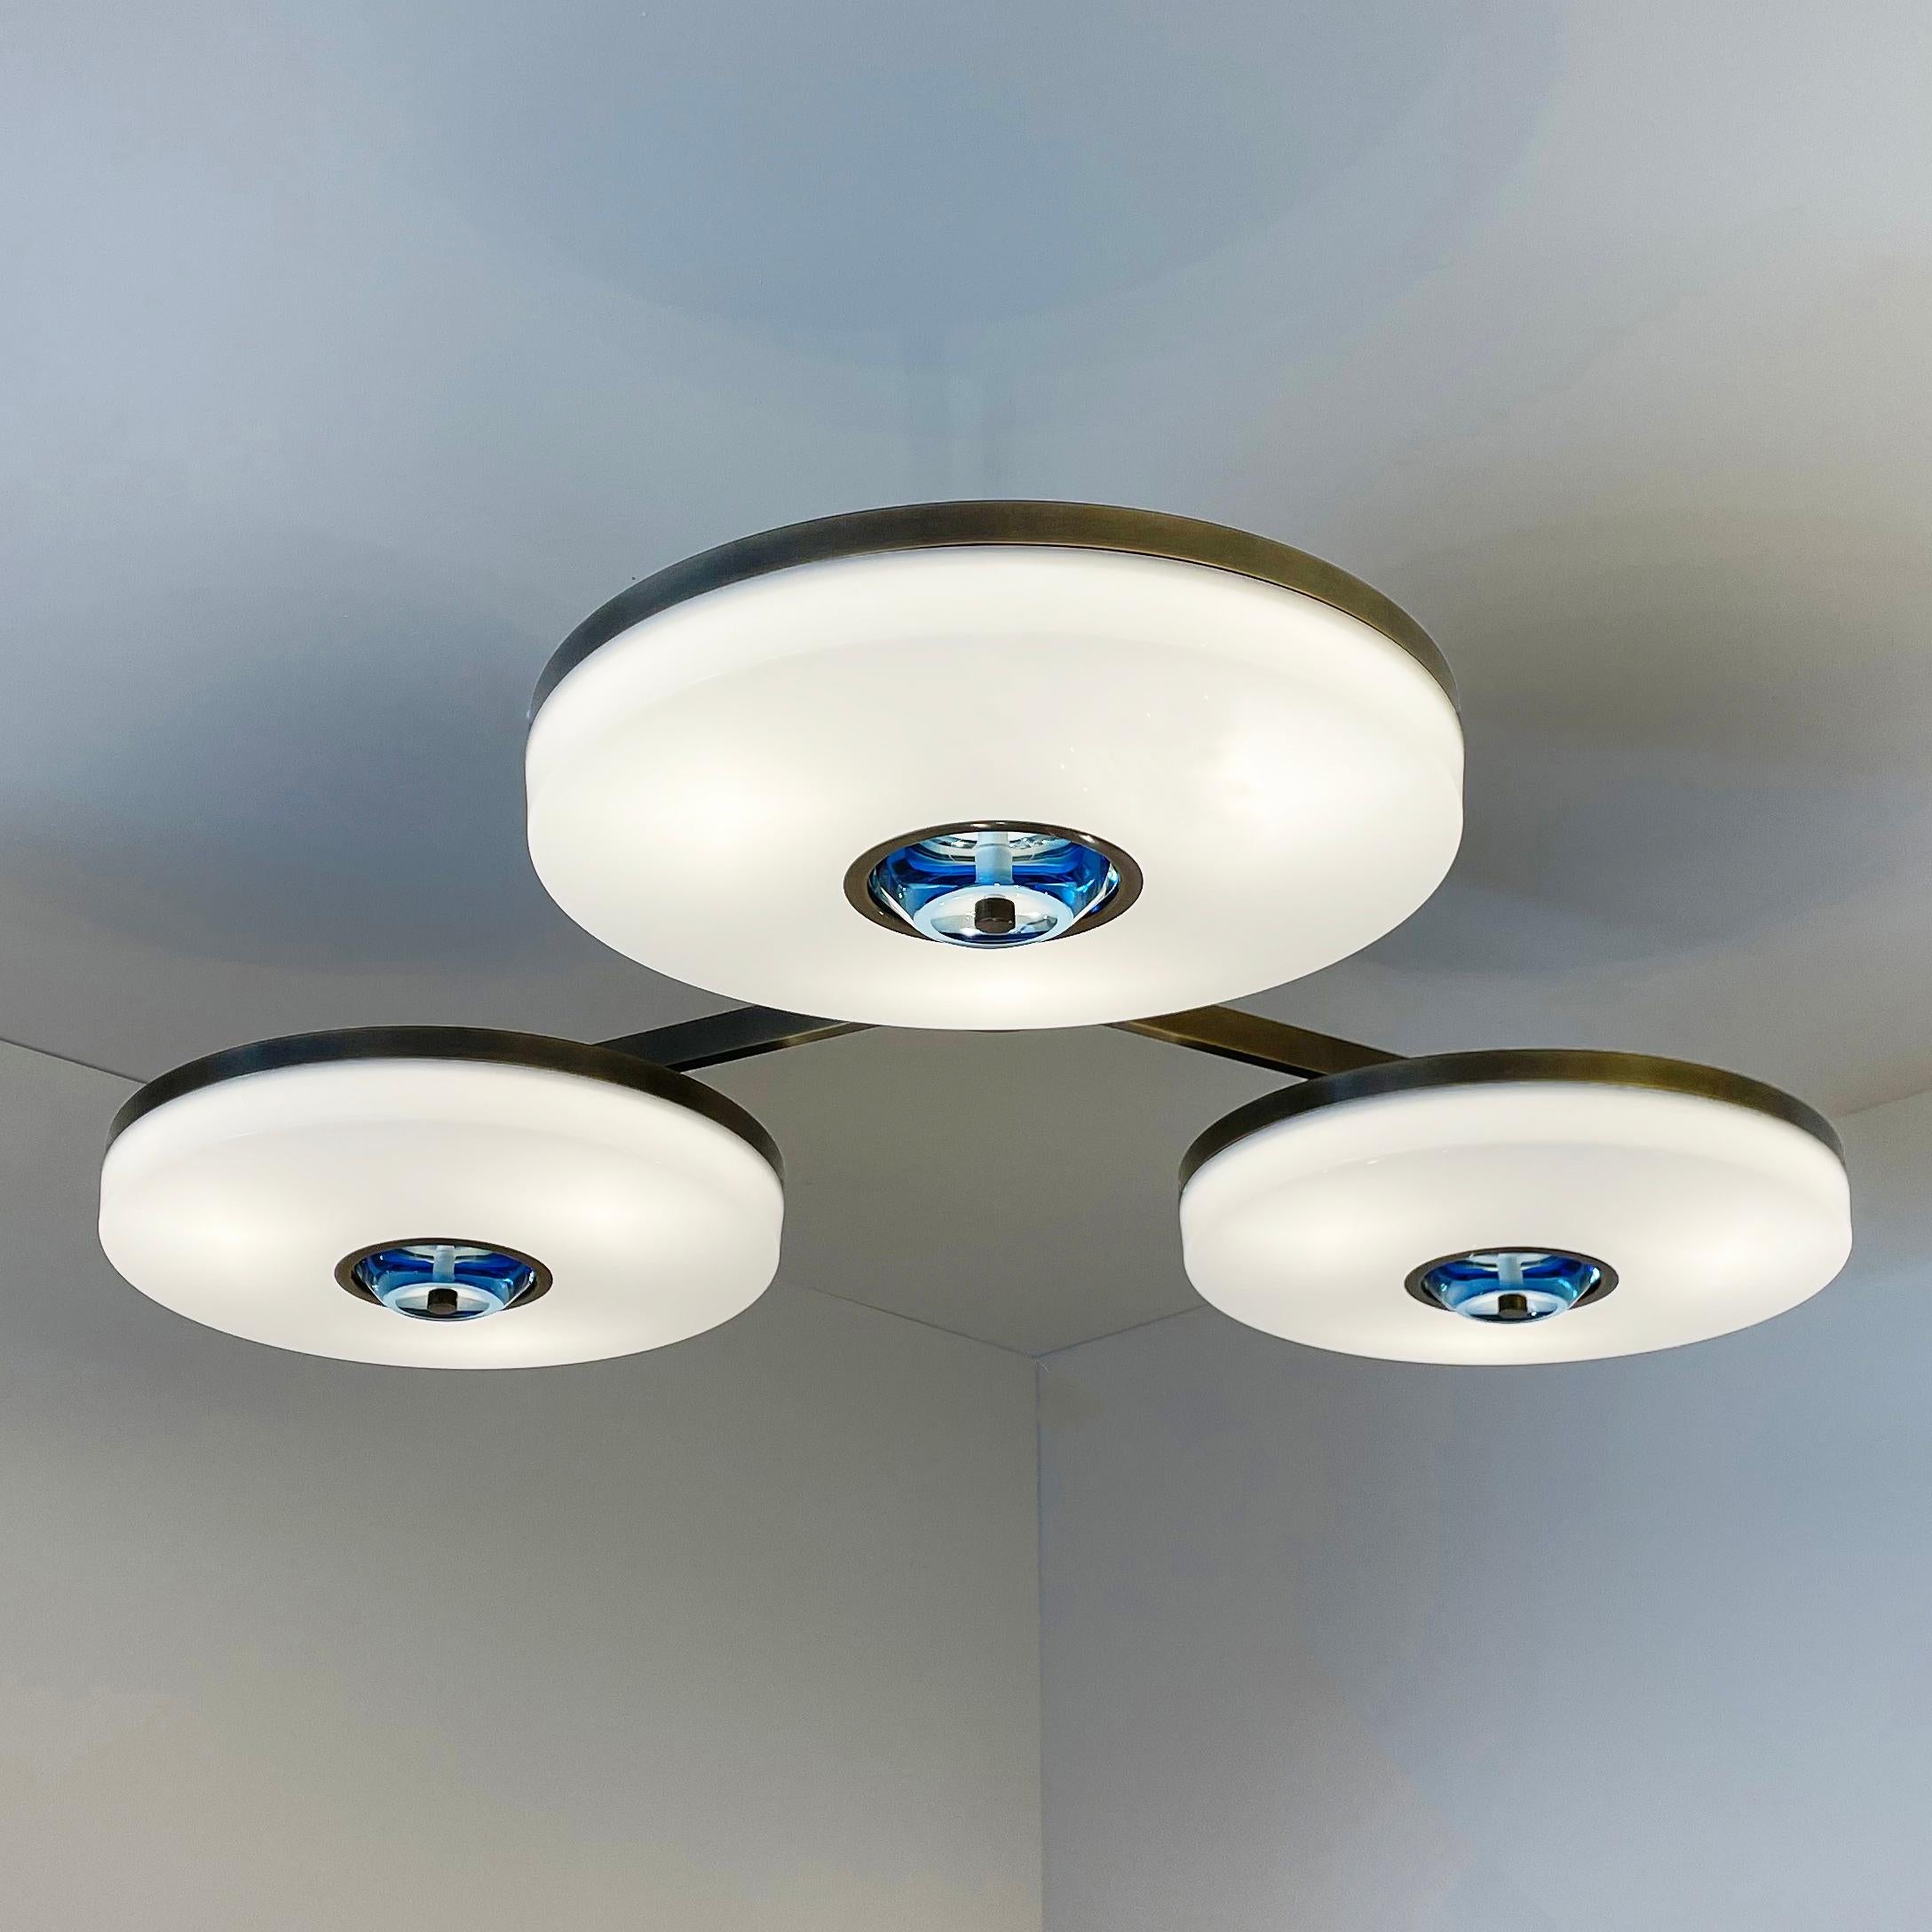 Iris N. 3 Ceiling Light by Gaspare Asaro-Polished Nickel Finish In New Condition For Sale In New York, NY